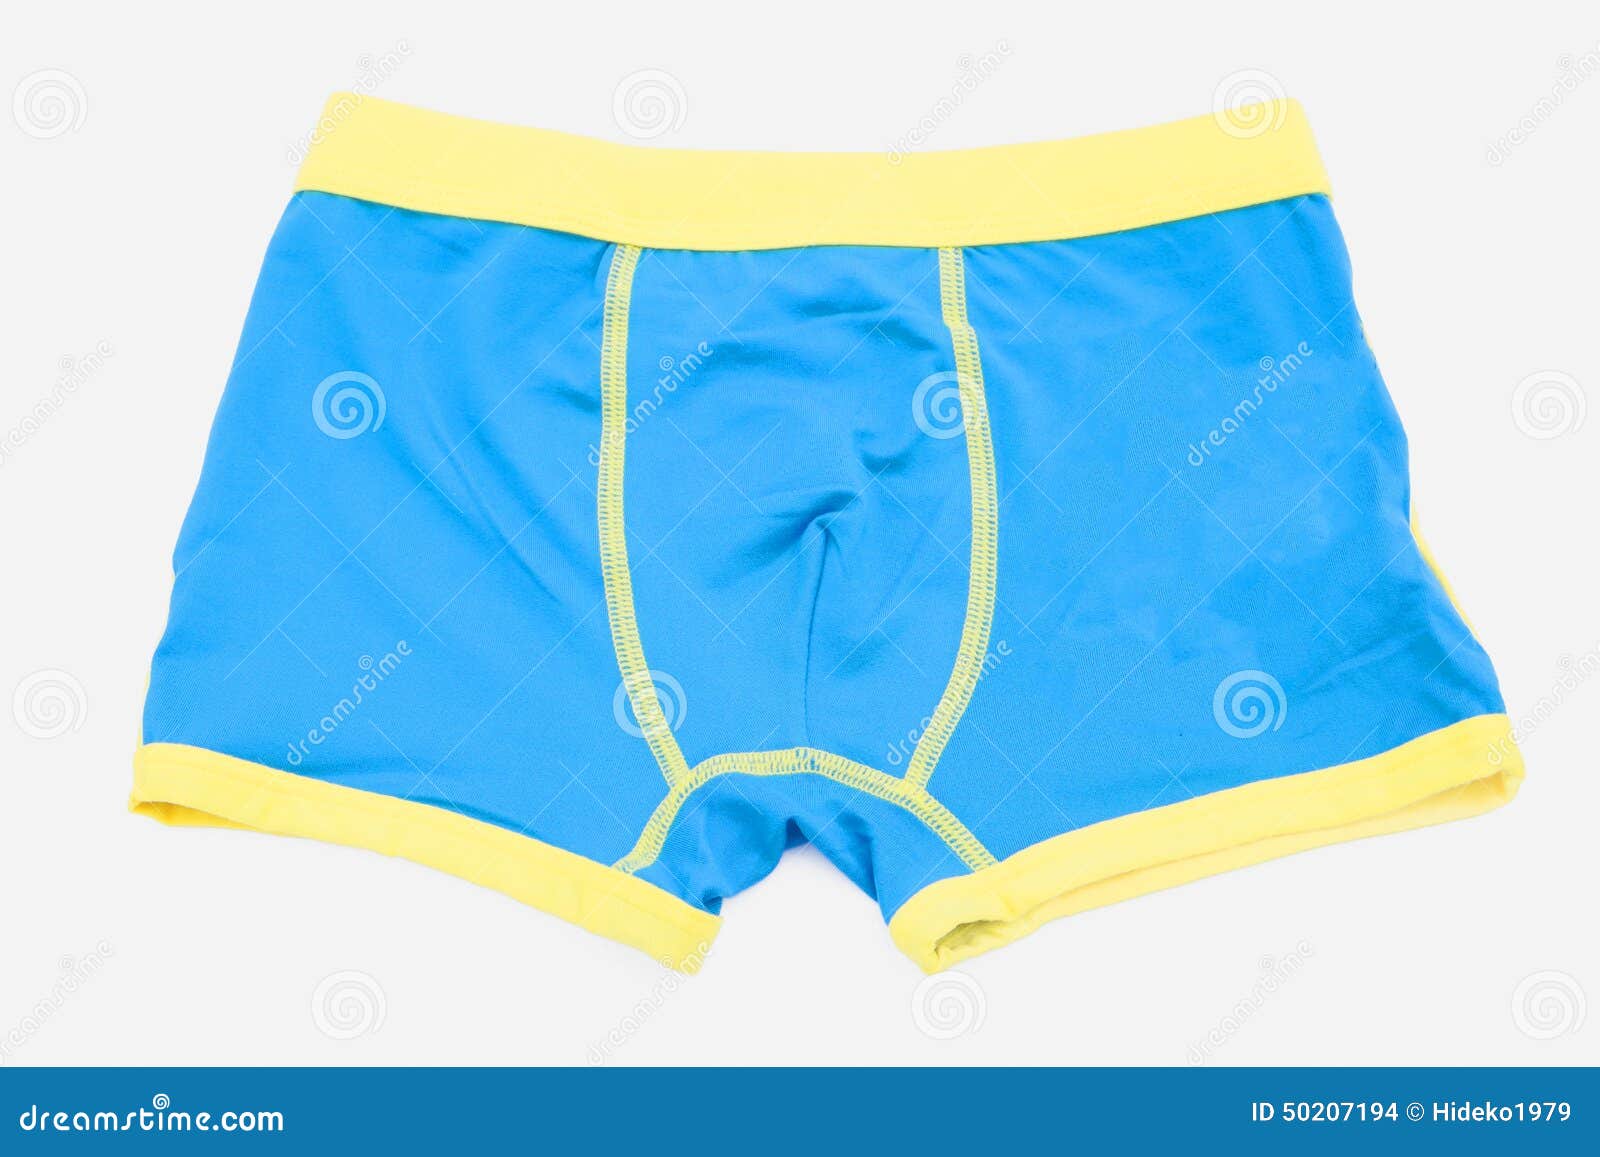 Children S Blue Swimming Shorts Isolated Stock Photo - Image of ...